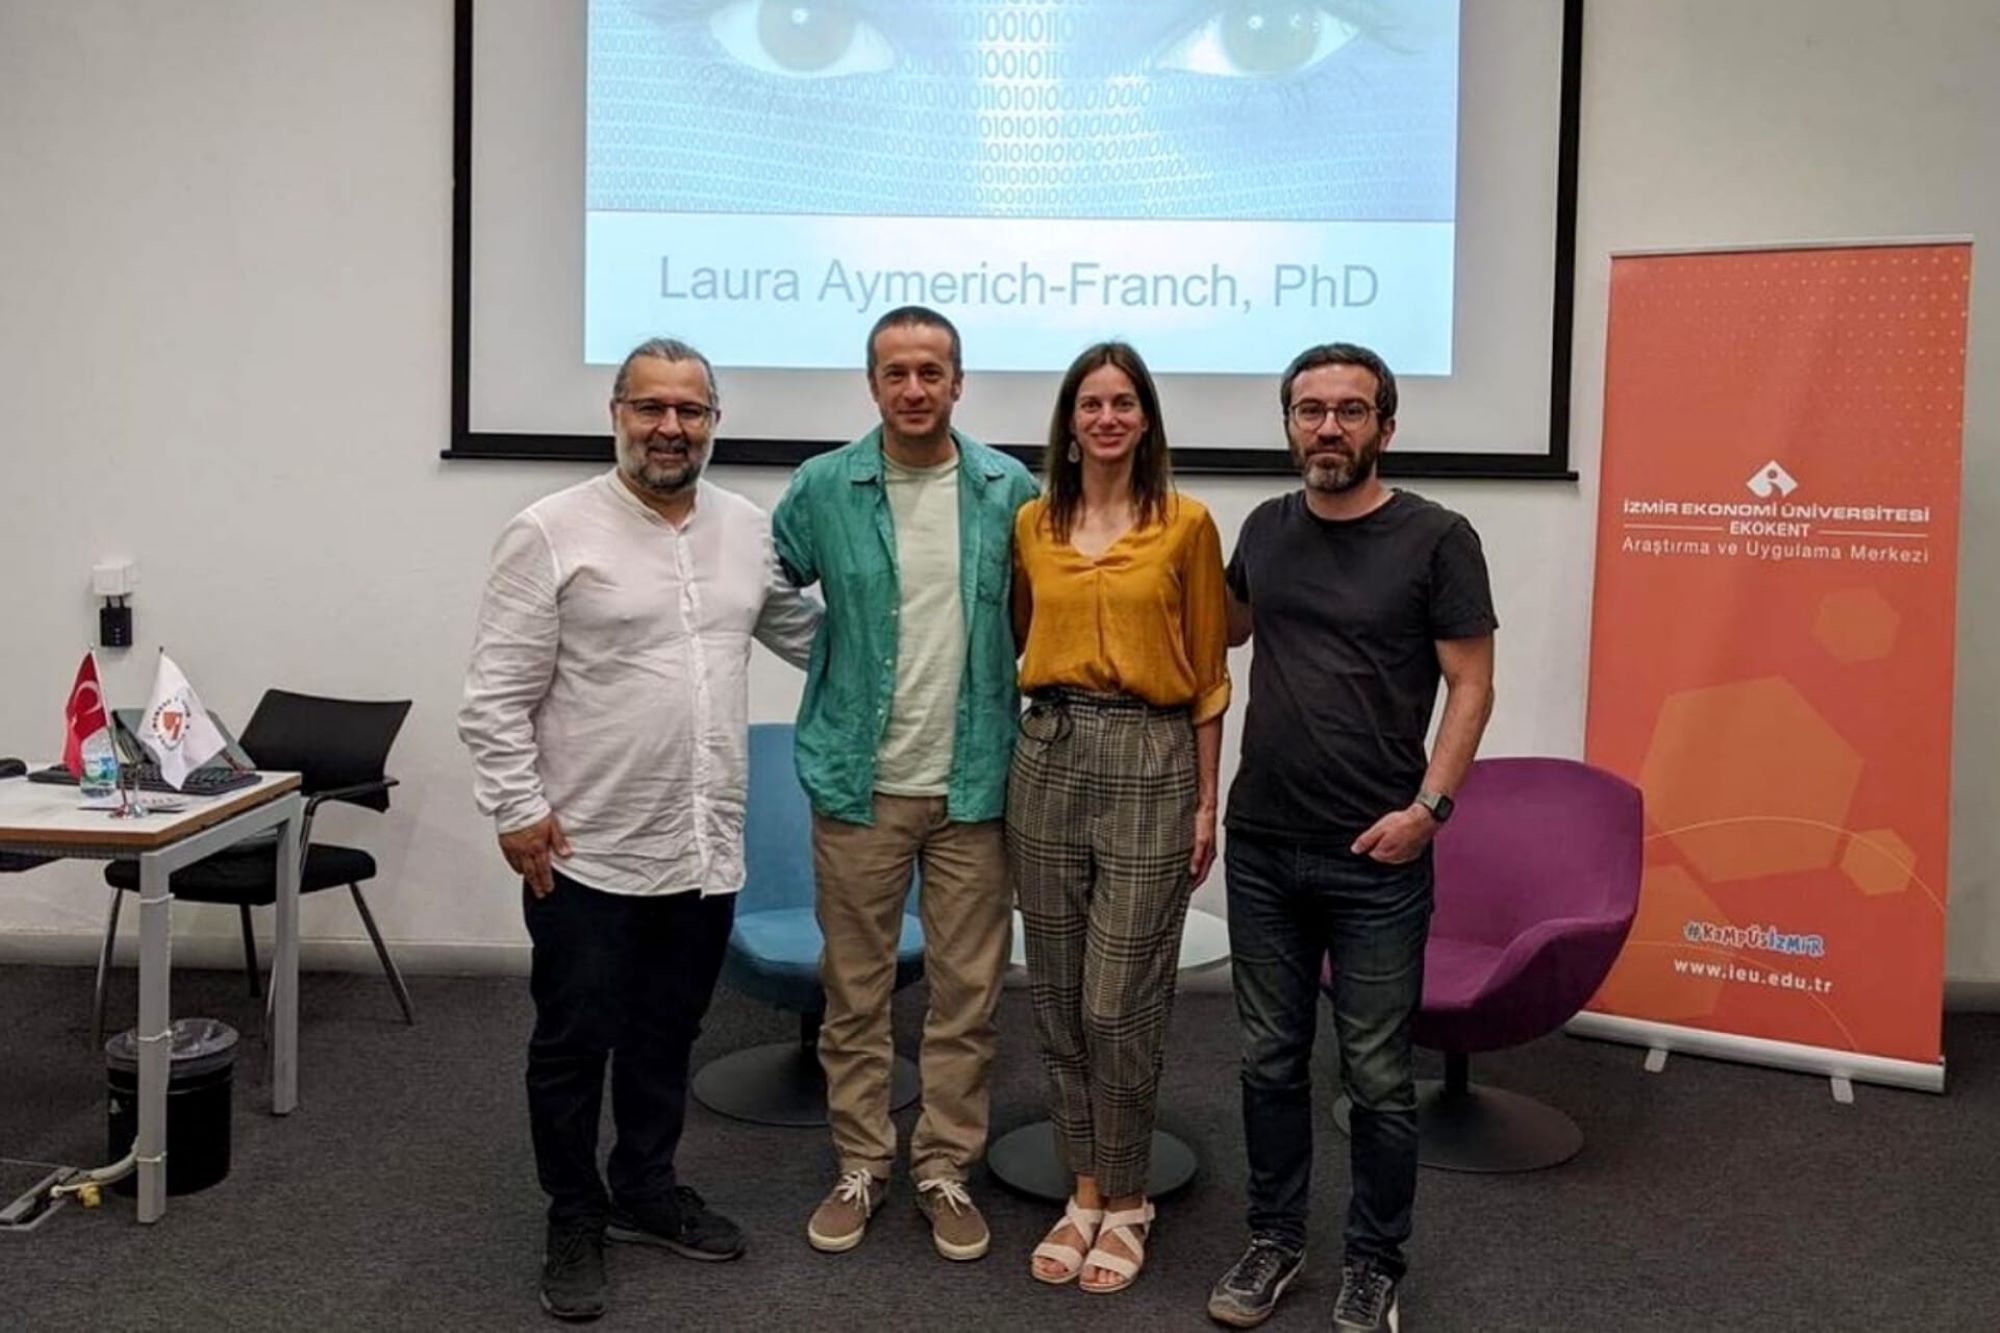 Laura Aymerich-Franch visited our department